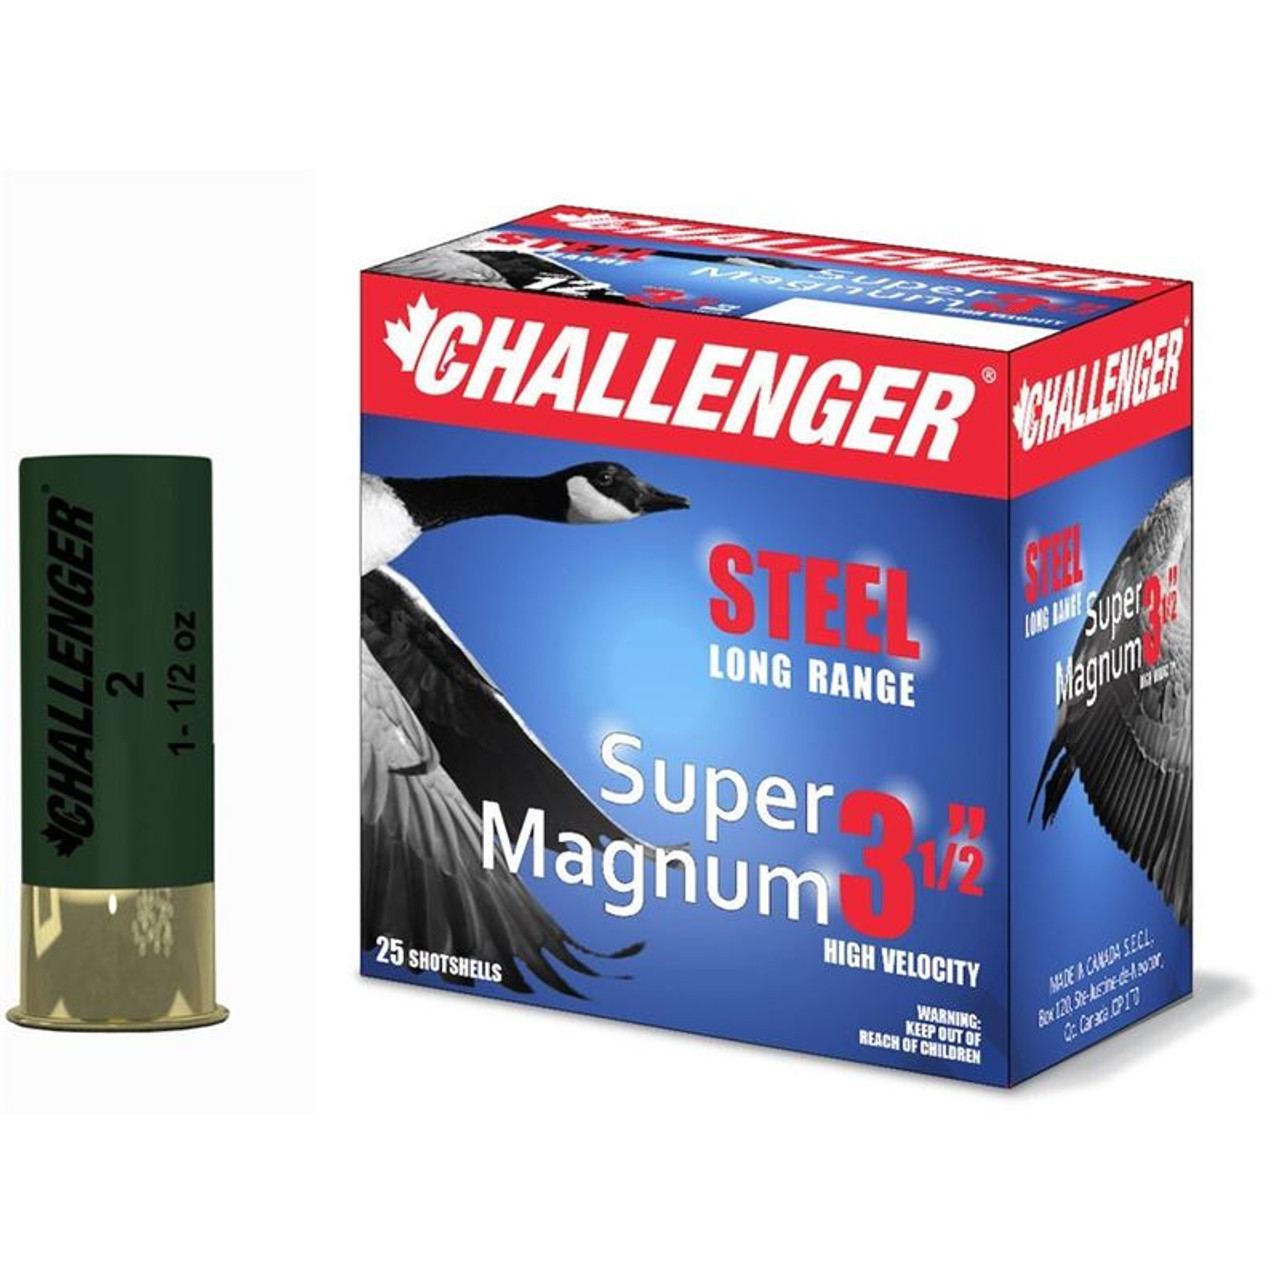 Challenger Super Magnum 12Ga 3 1/2″ #4 1 1/2 oz 1500 FPS – 25Rds

Specifications

Velocity: 1500 f/s
Shot Size: #4
Shot Composition: Steel
Shell Length: 3 1/2"
Bullet Weight: 1-1/2 oz
Quantity: 25 Rounds